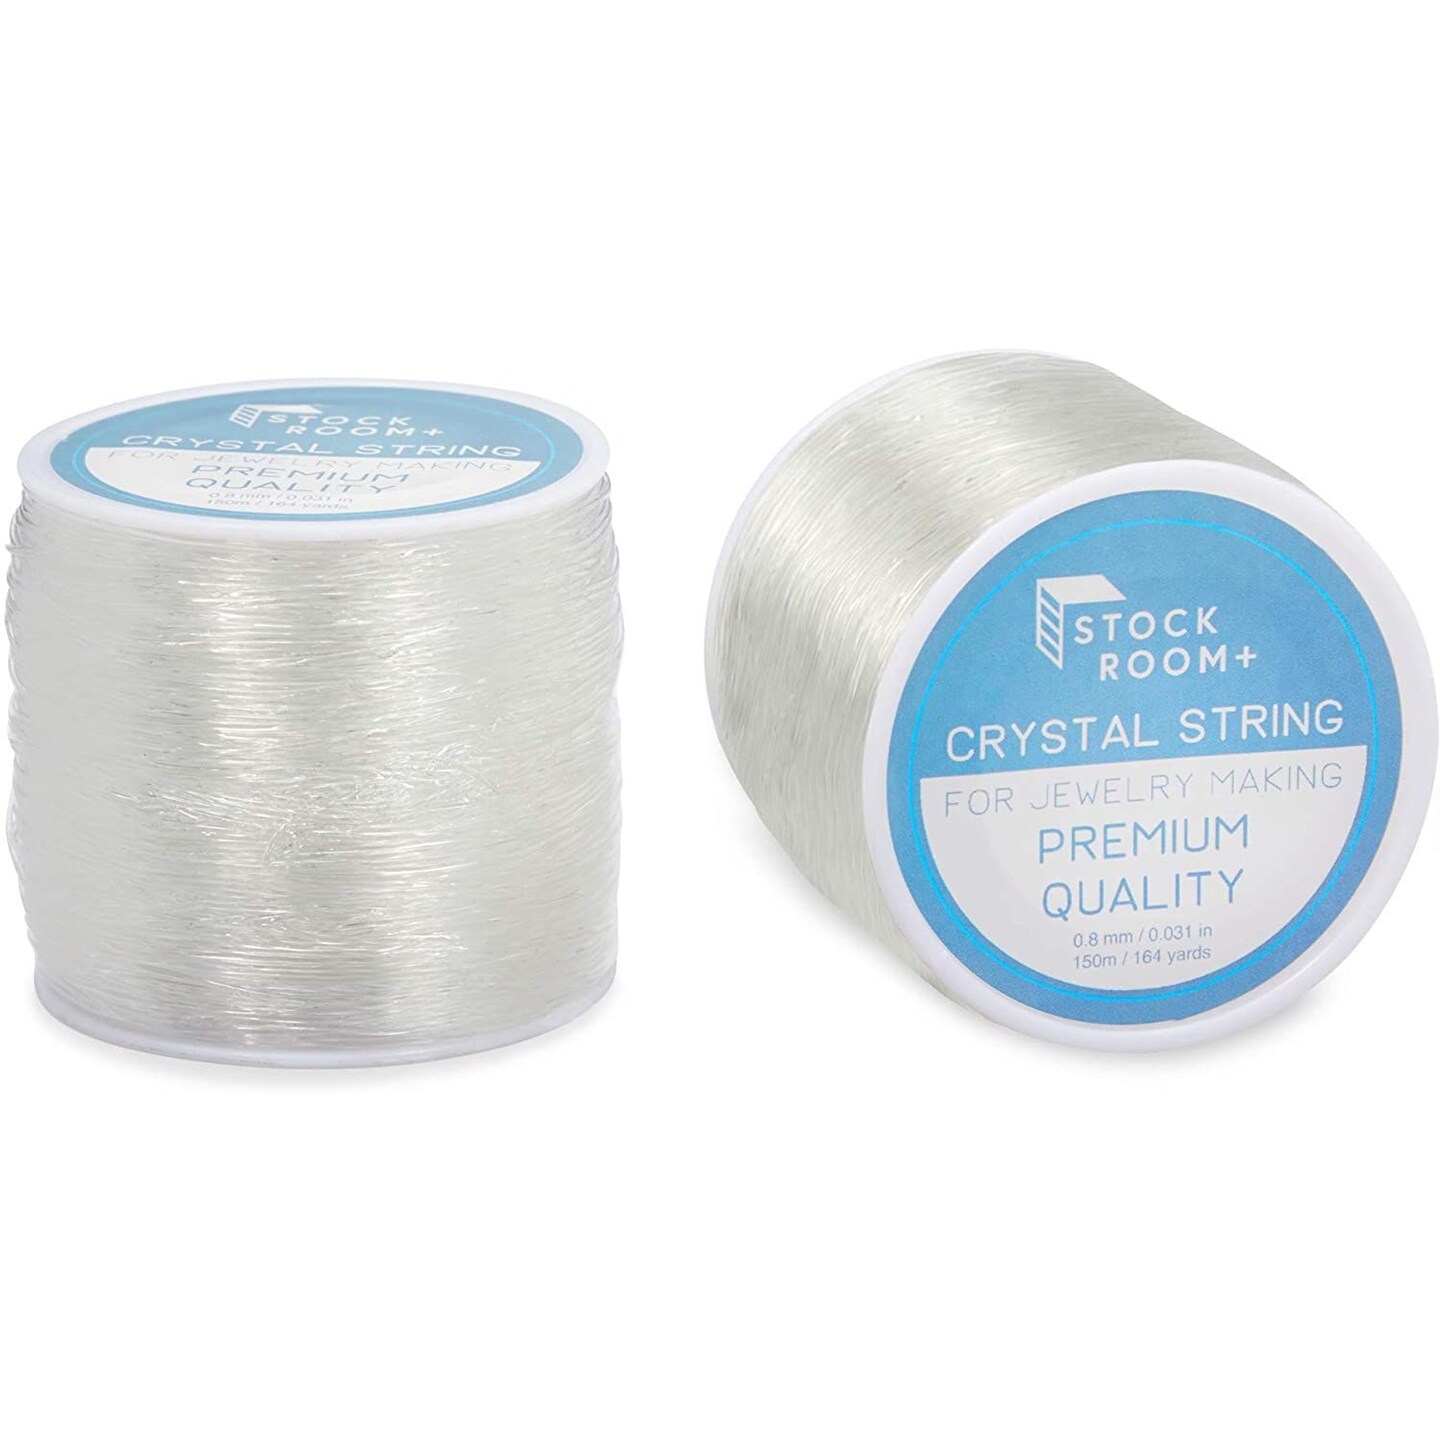 2x 1roll Clear Elastic Thread Stretchy Cord Jewelry Making Accessories Findings